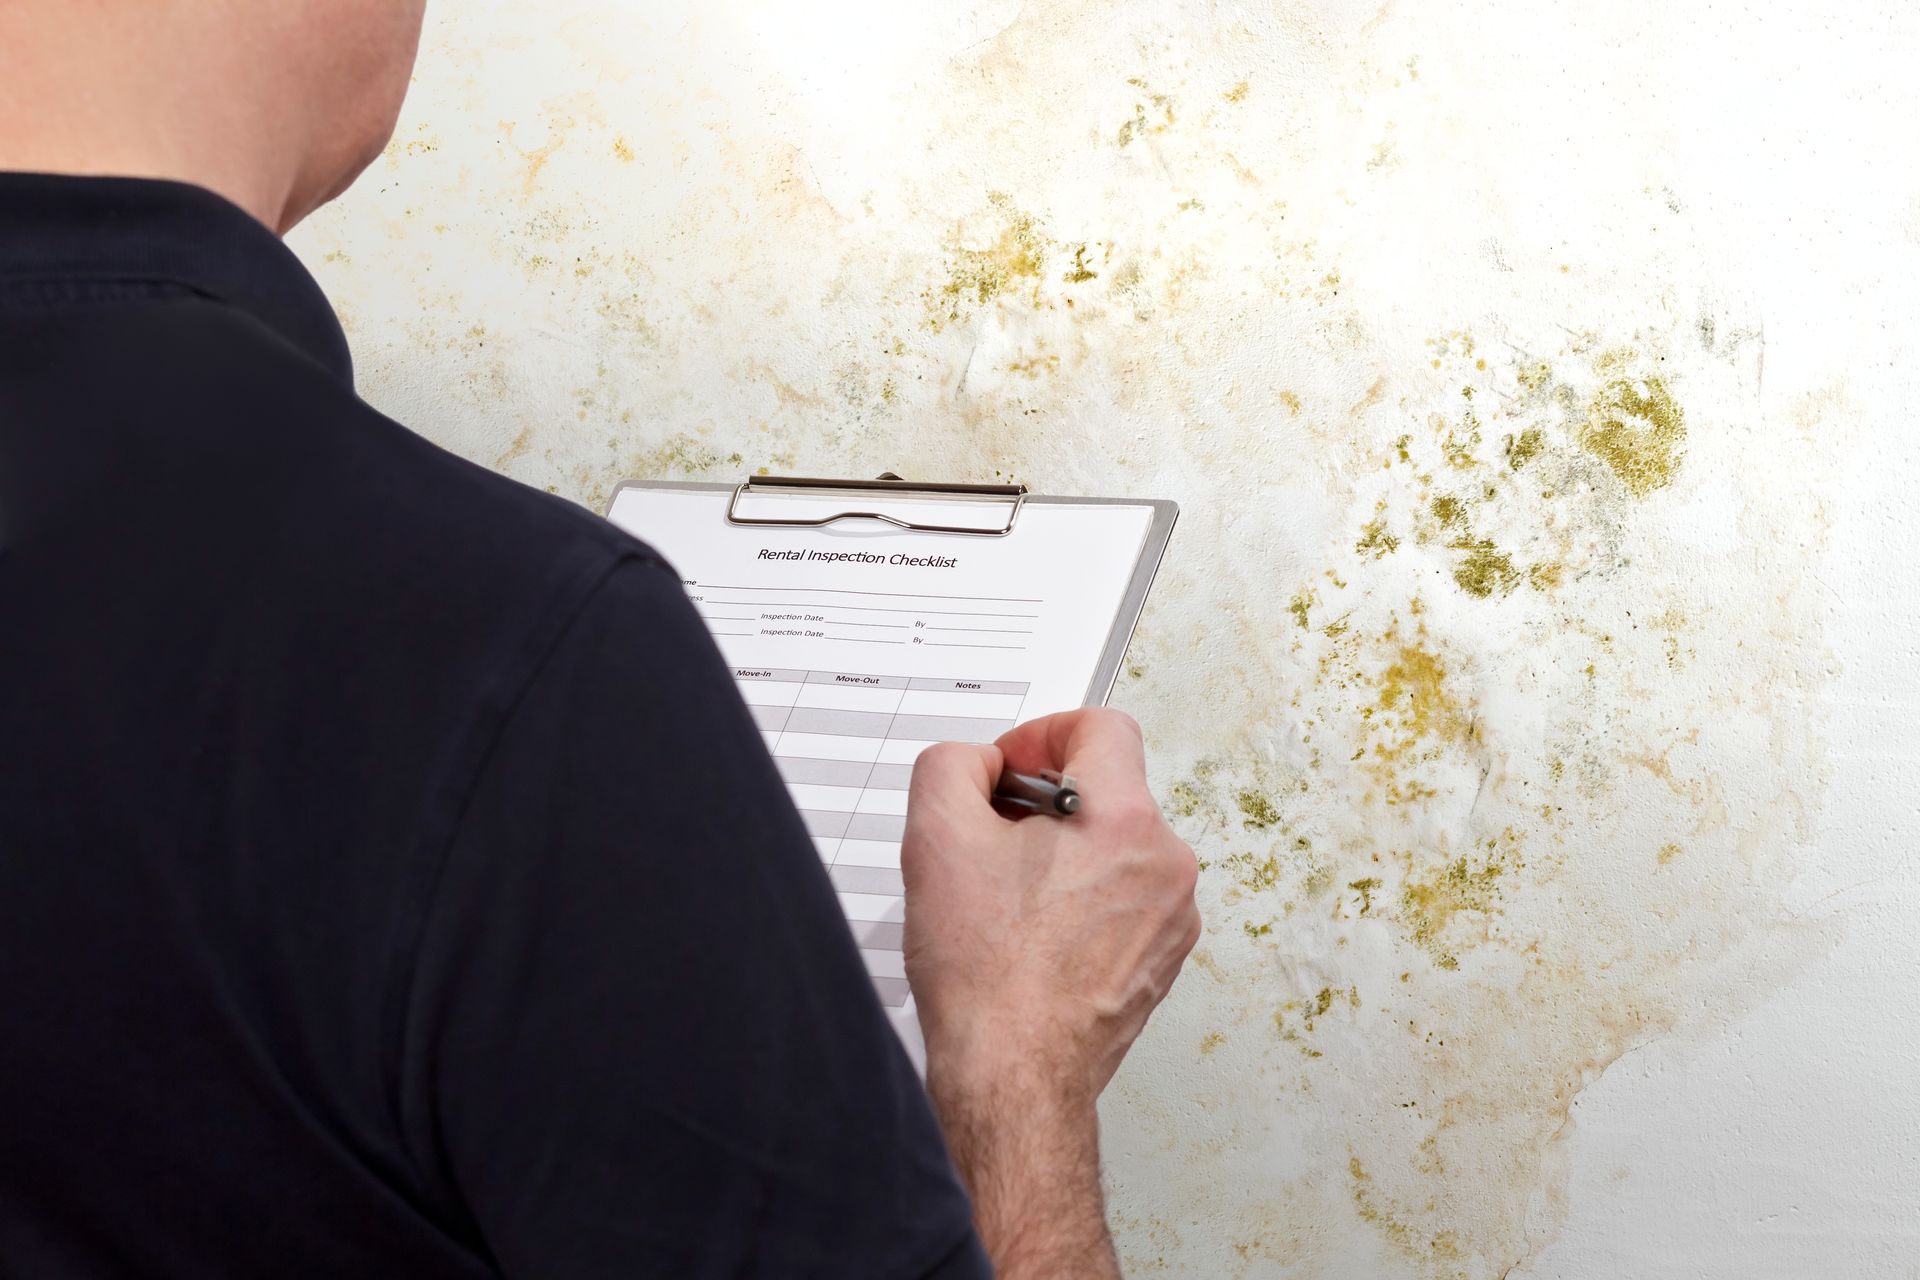 A man is writing on a clipboard in front of a mouldy wall.